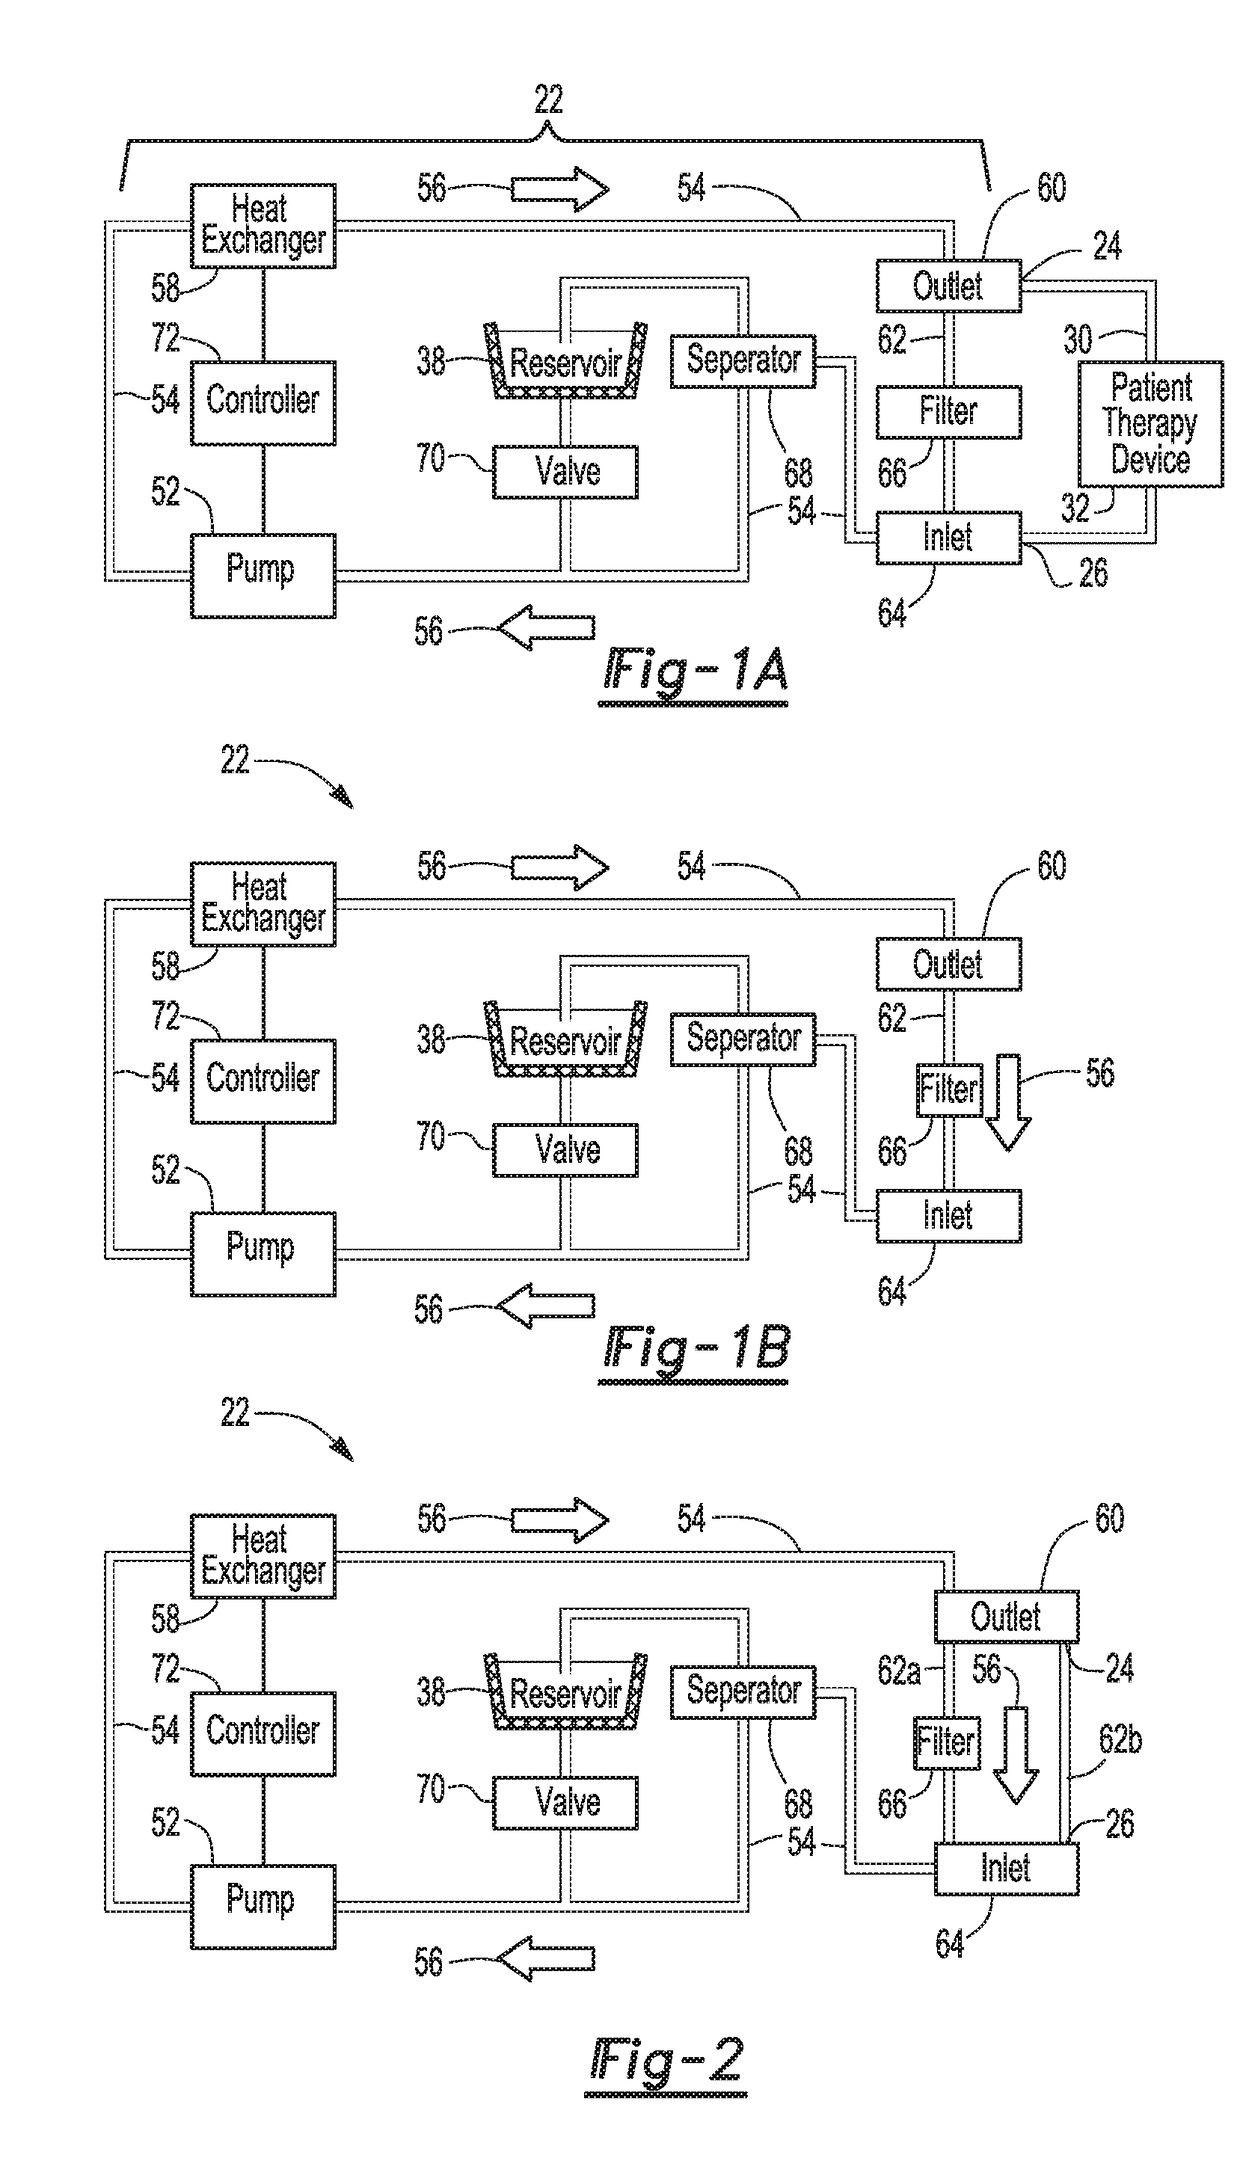 Method of disinfecting a thermal control unit